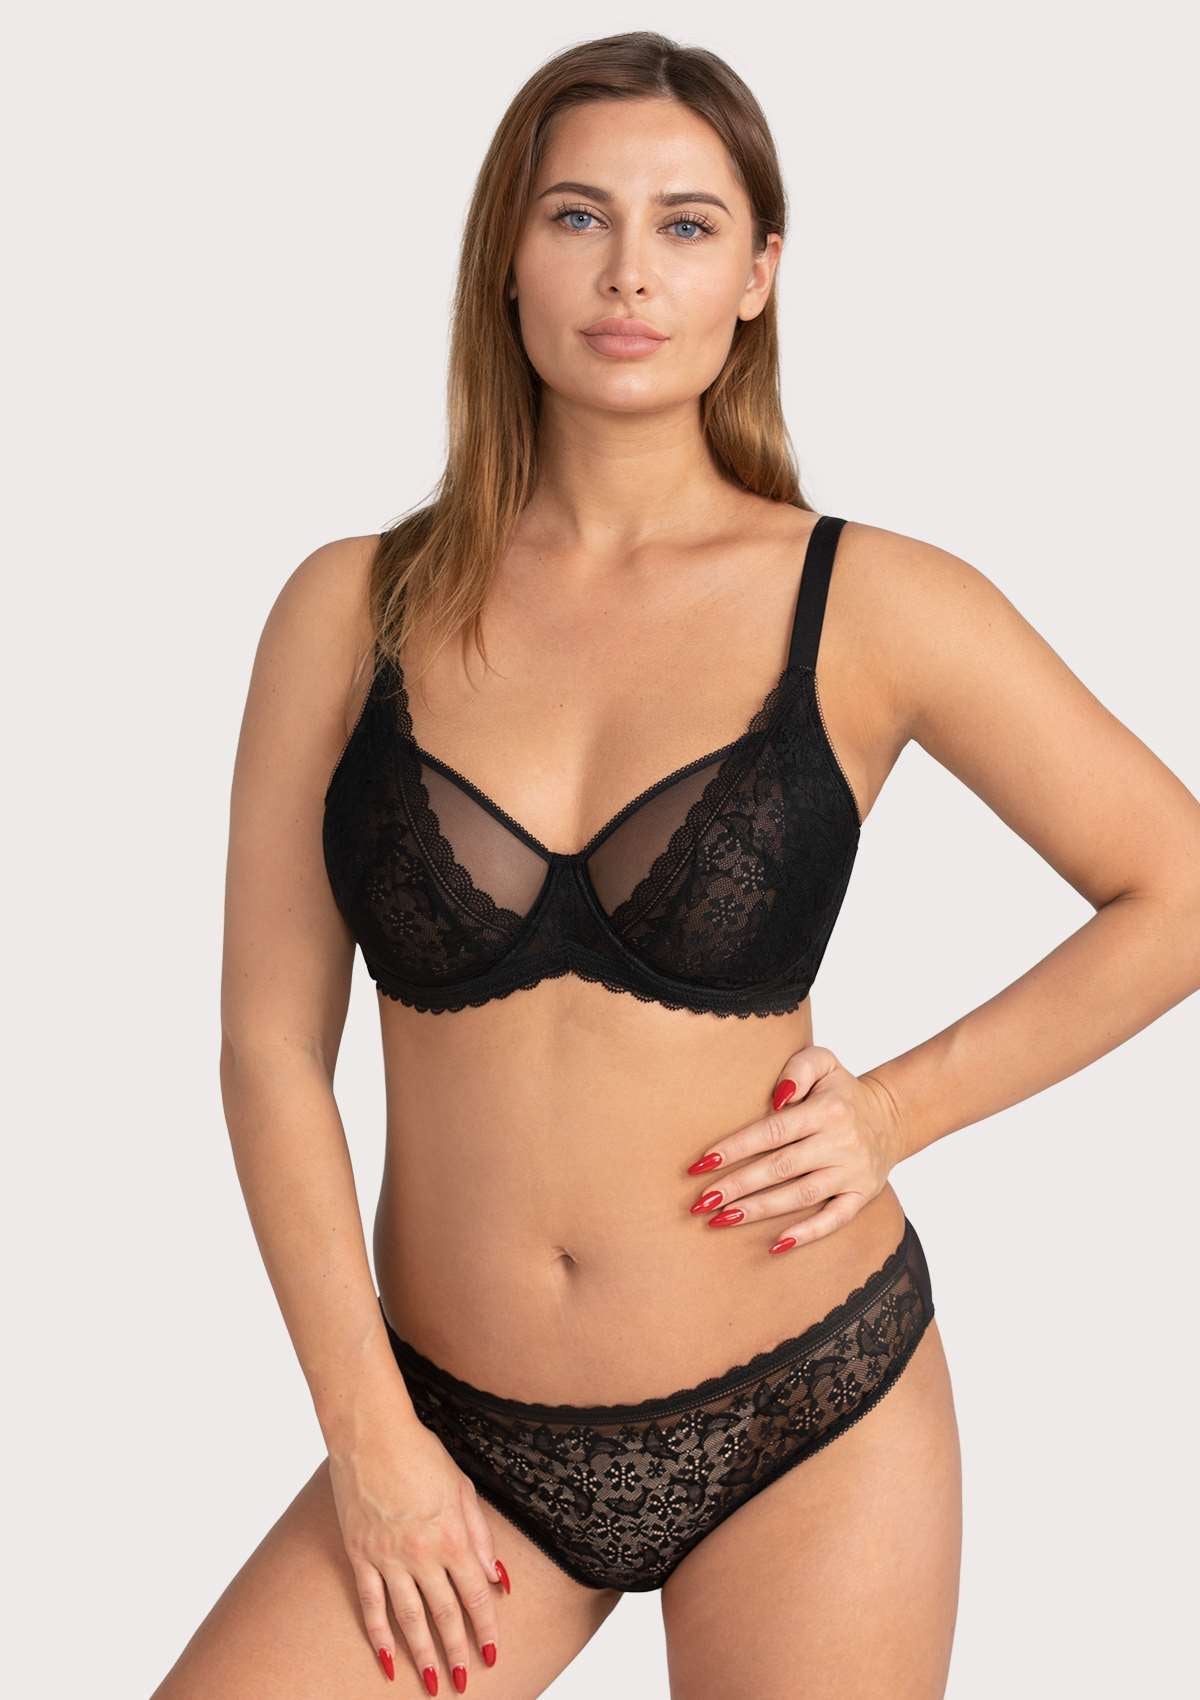 HSIA Anemone Lace Bra And Panties: Back Support Wired Bra - Black / 36 / DDD/F